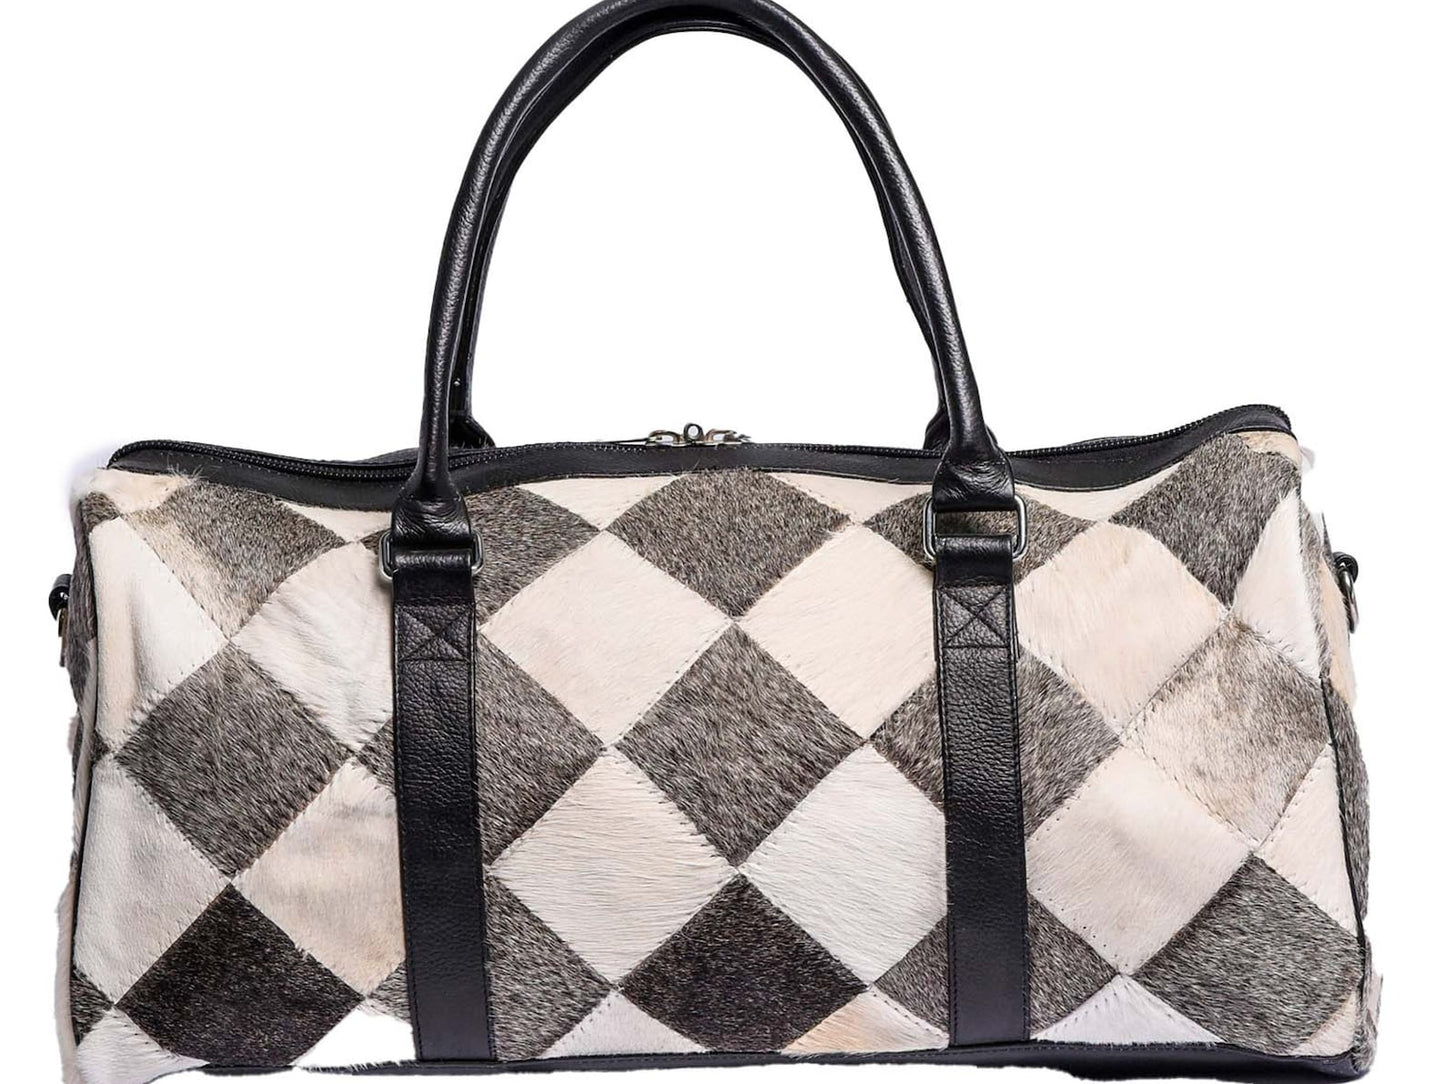 Grey White Patchwork Cowhide Duffle Bag